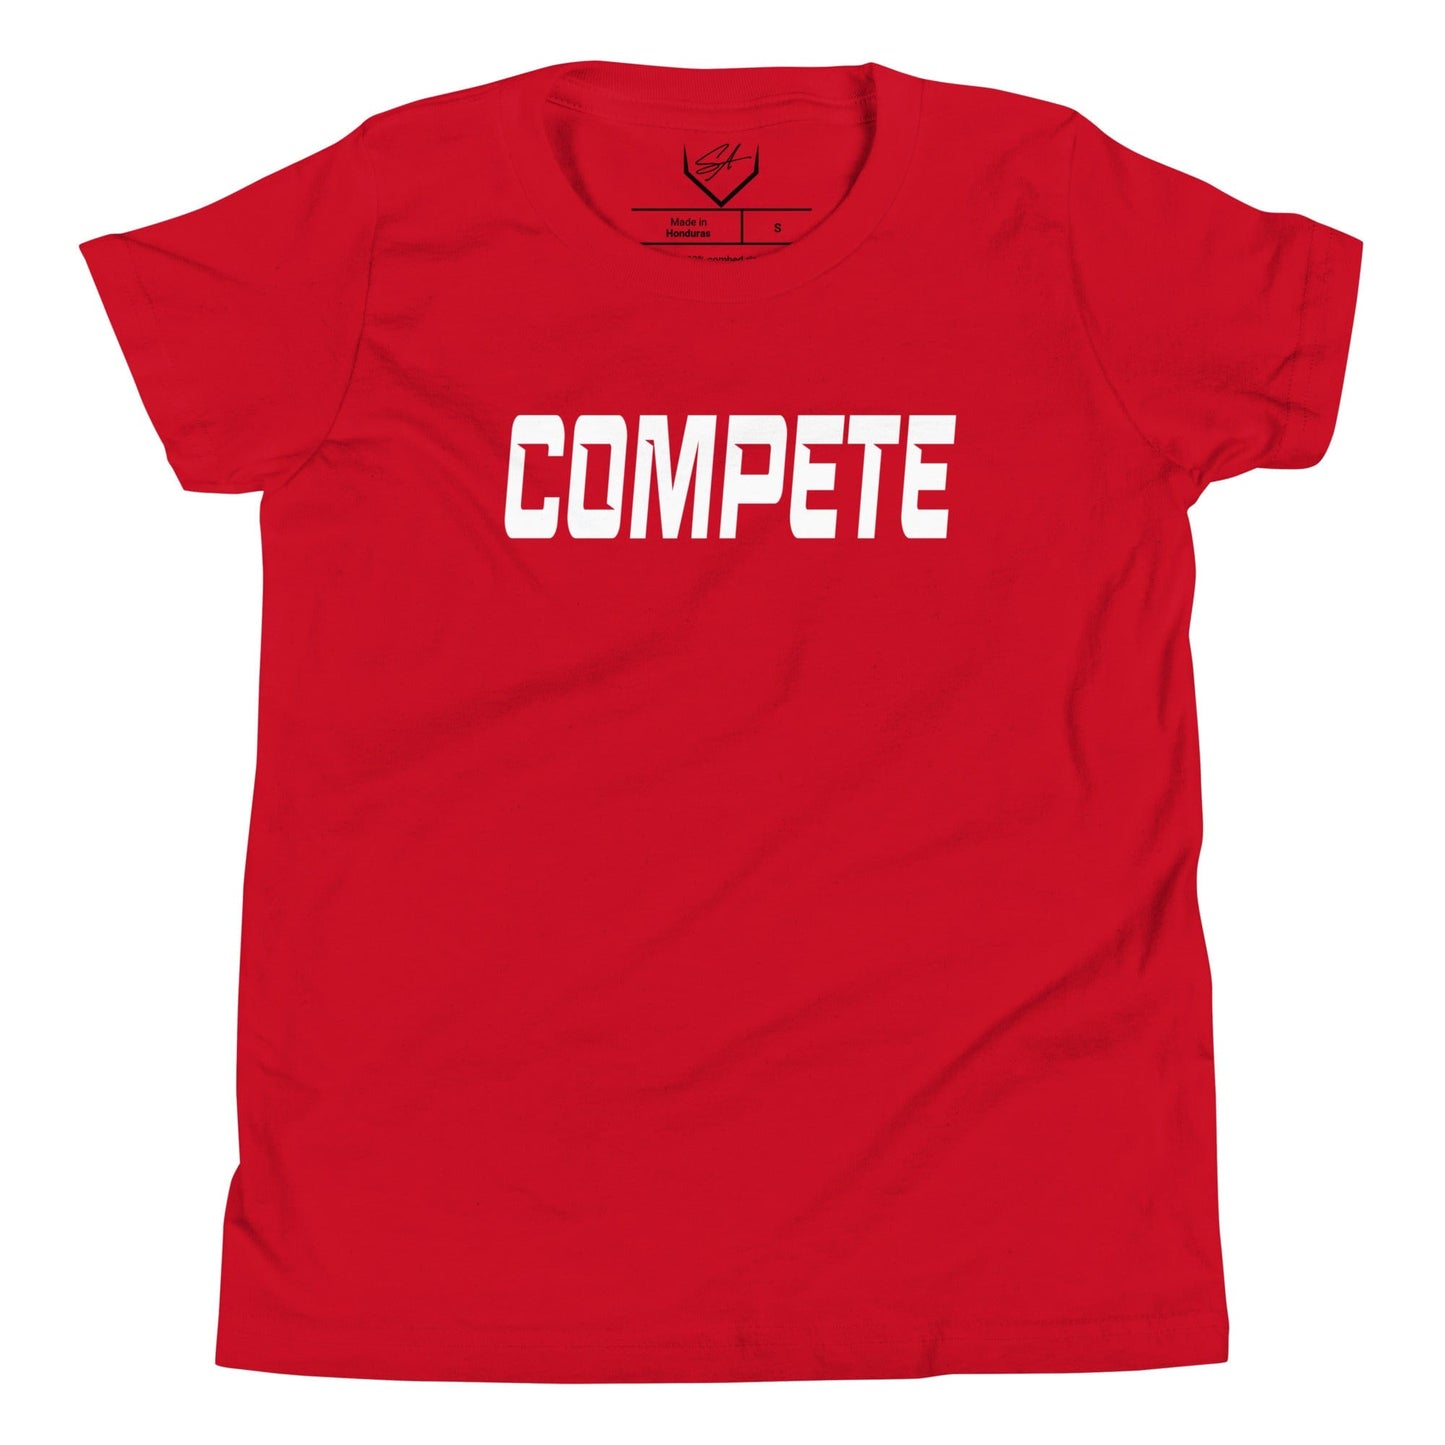 Compete - Youth Tee